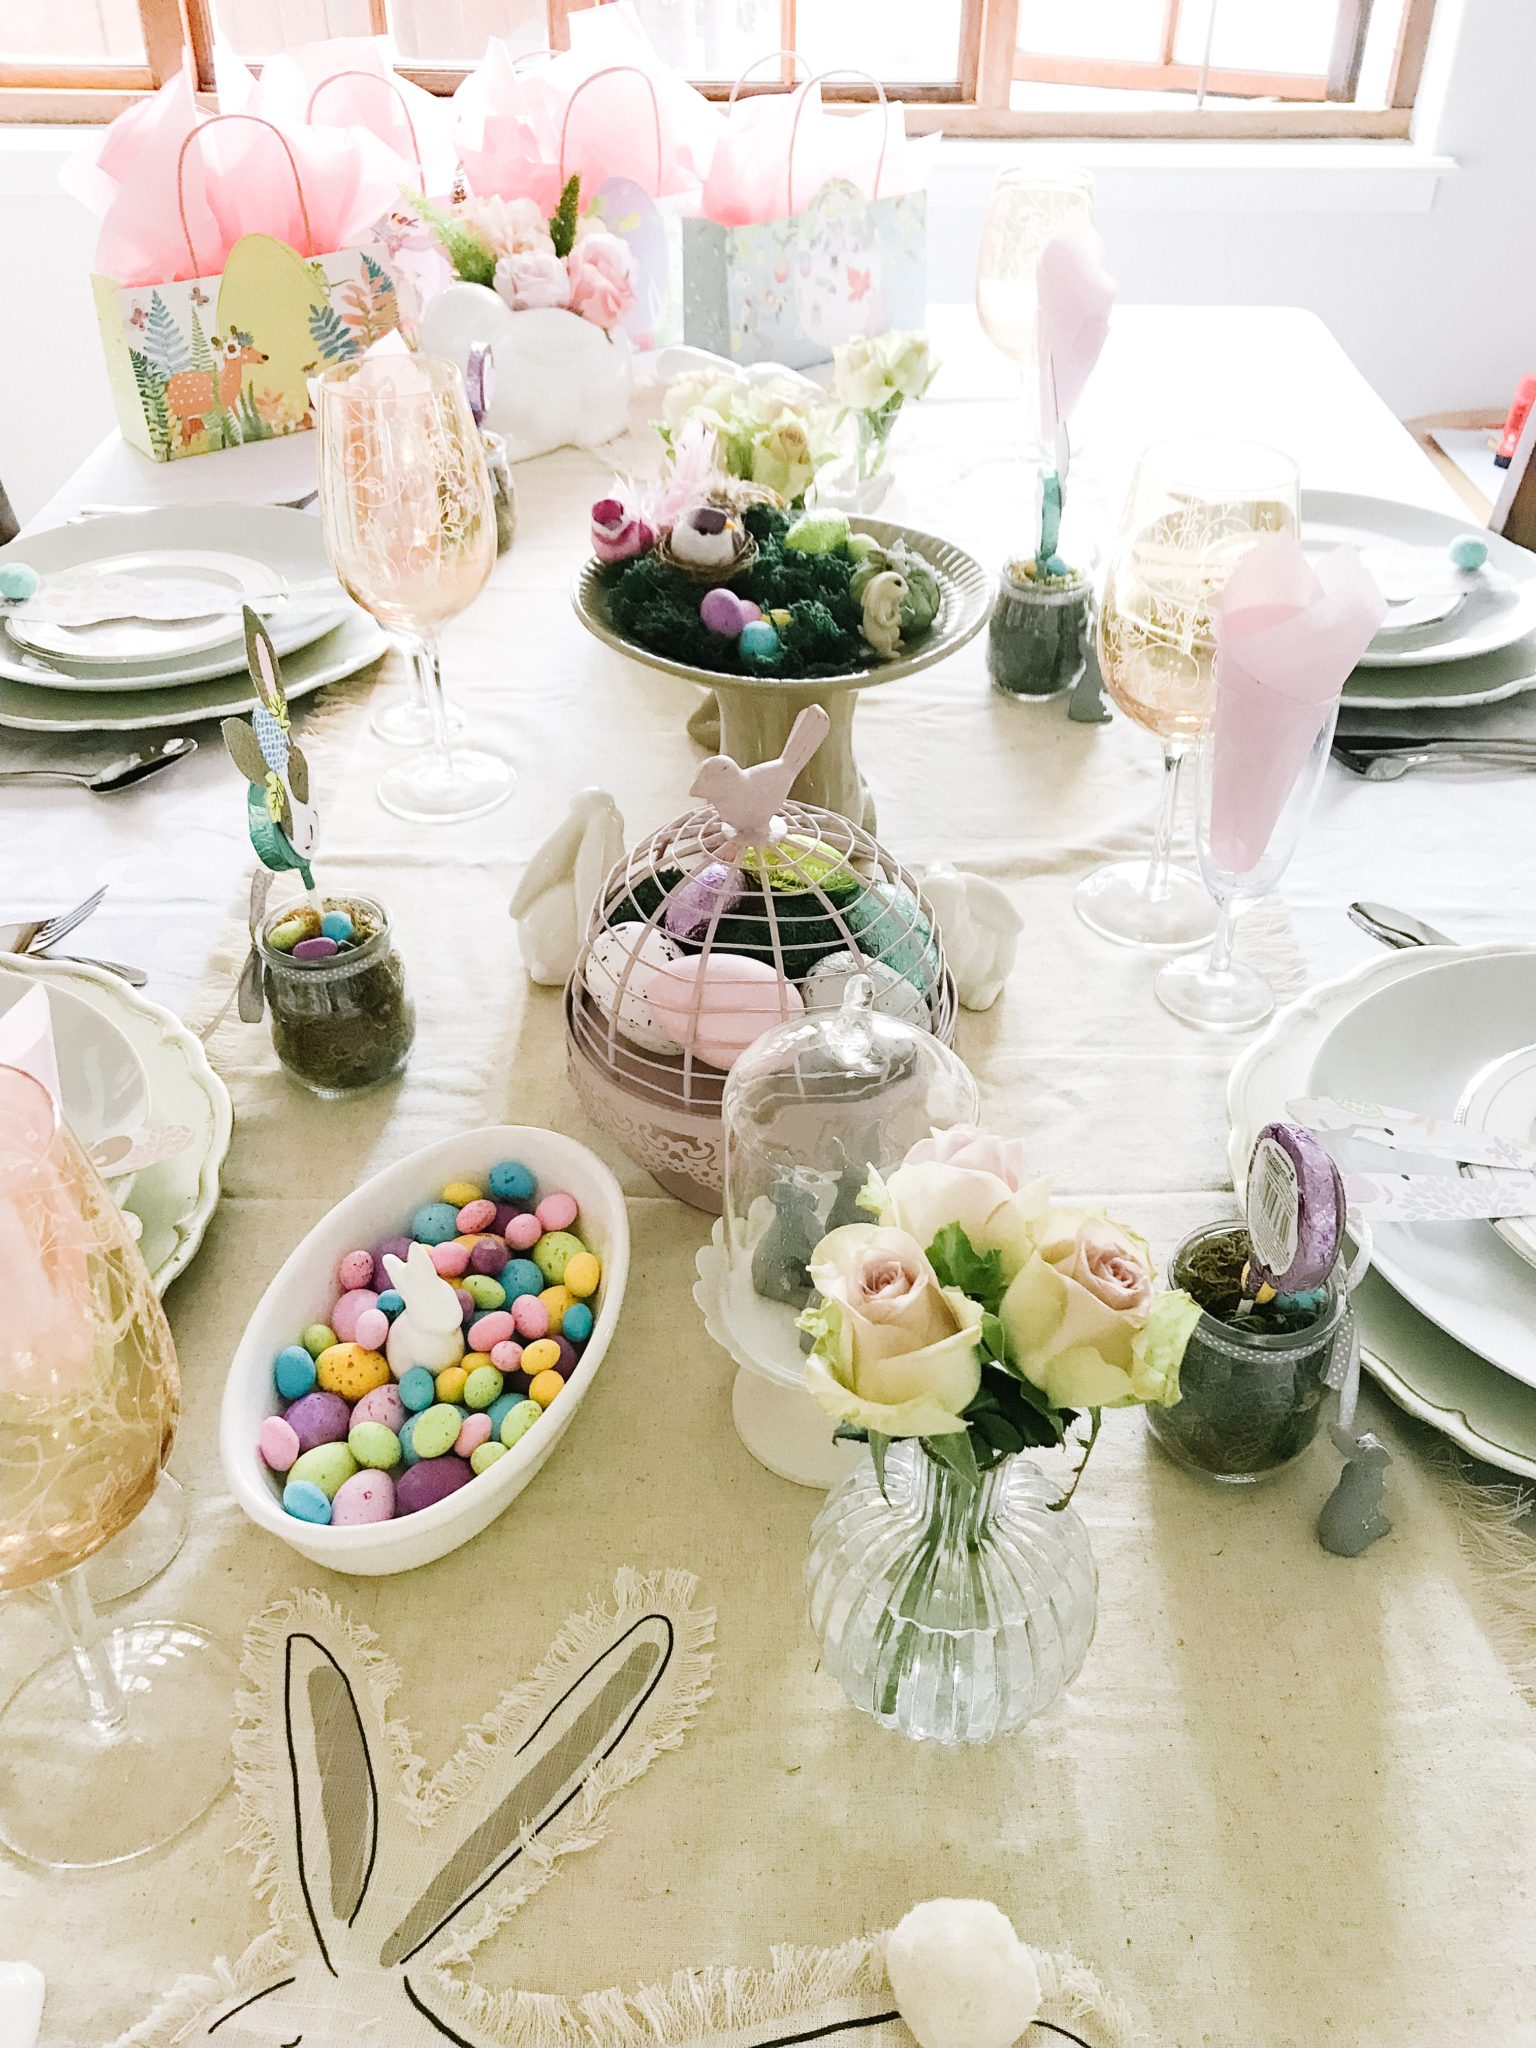 Easy Easter table setting – pretty in pastels